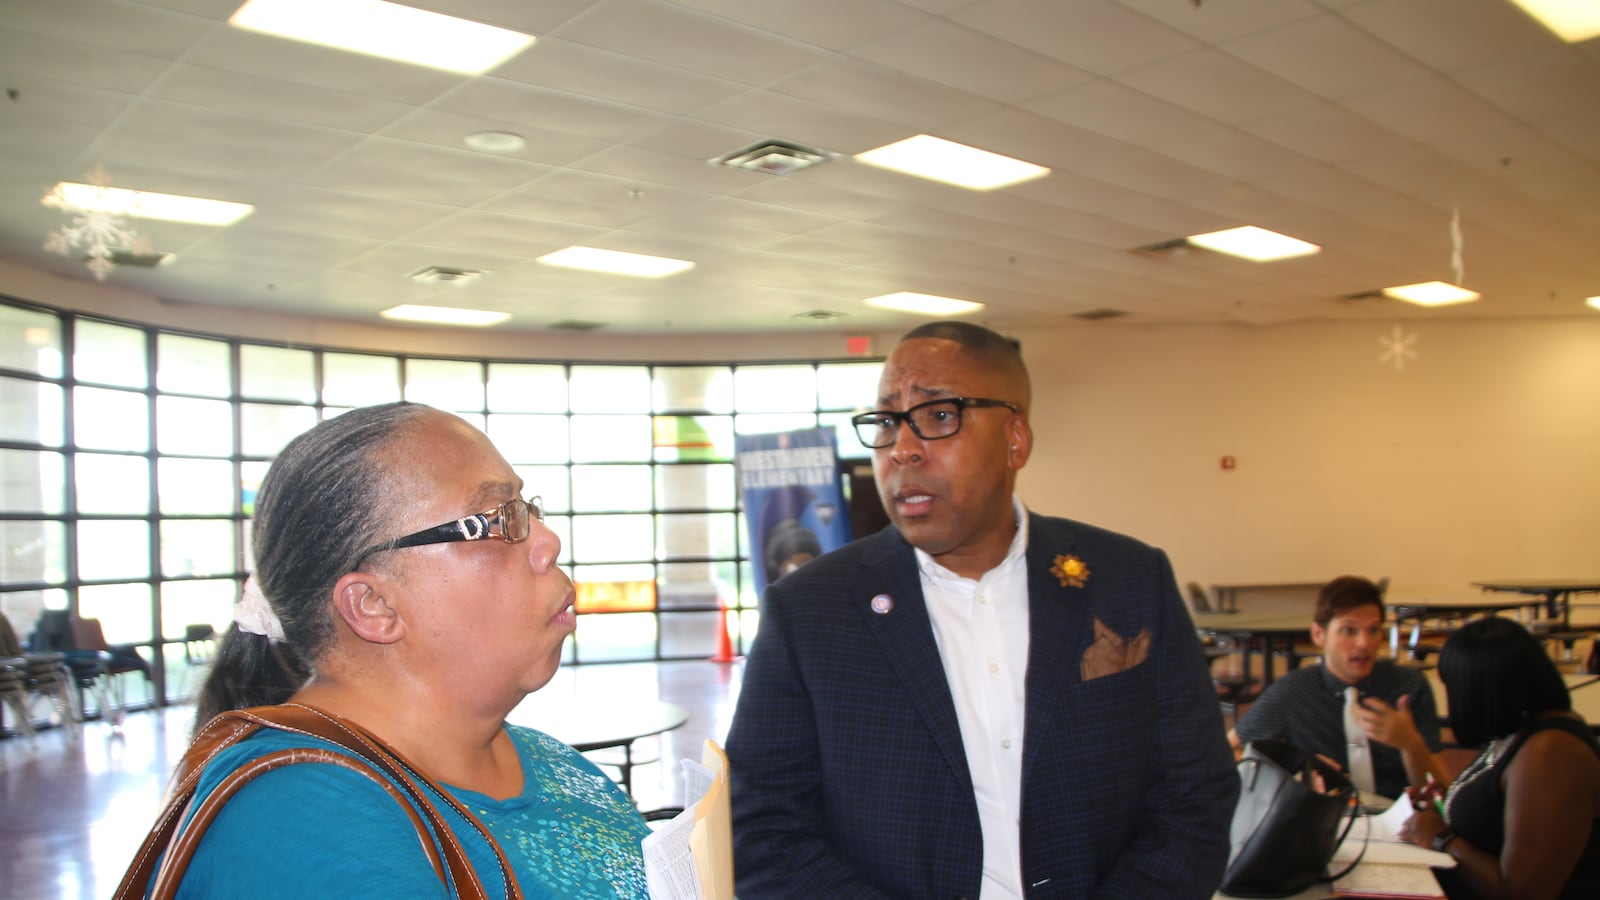 Rodney Rowan, assistant superintendent and new leader of the district's iZone, talks with his former colleague Sandra Jenkins at a job fair. Jenkins is looking for work after a car accident forced into early retirement several years ago.